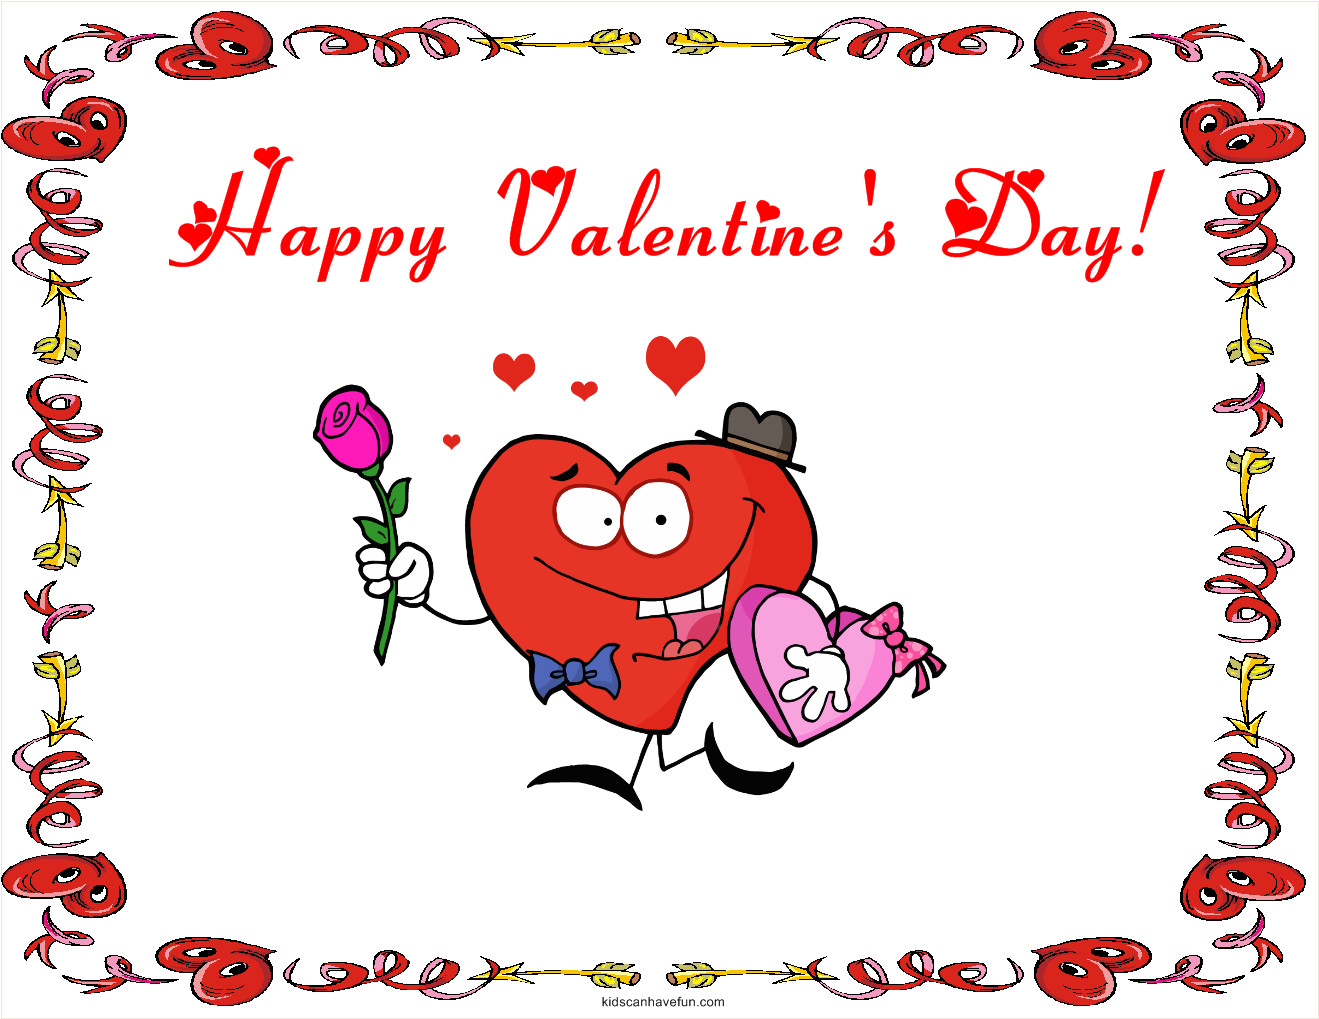 Funny Happy Valentines Day Quotes
 Entirely from heart Happy Valentine’s Day